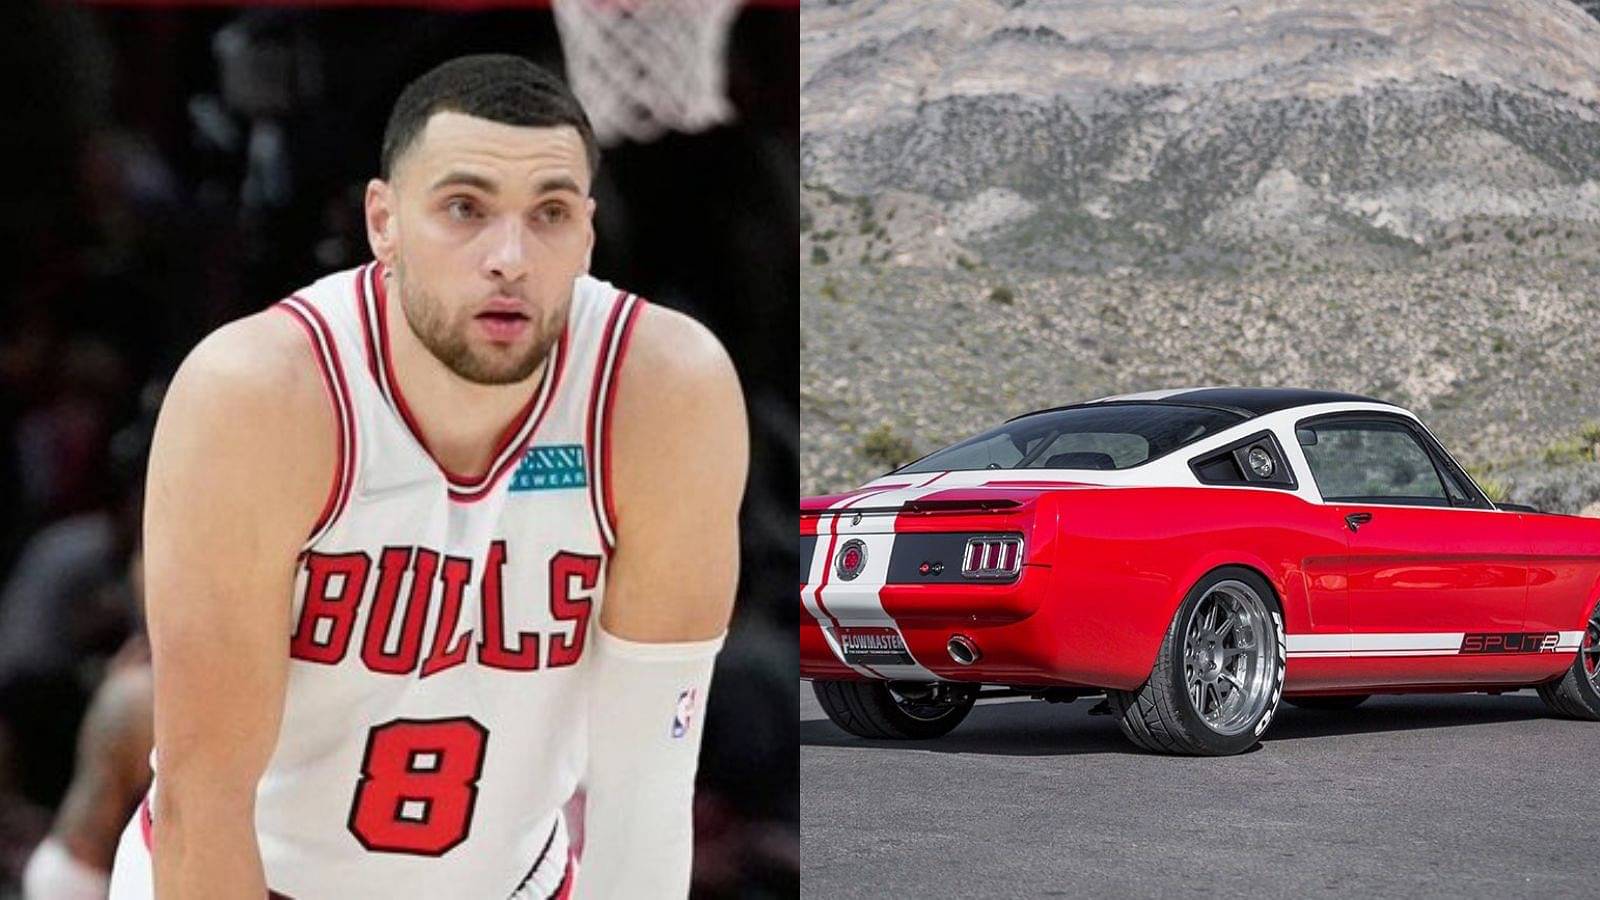 "My Classic cars are my babies!": Zach LaVine, Chicago star inline for a $212 million contract extension, has a stunning collection of classic cars, including 1965 'stang from 'Ford vs Ferrari'